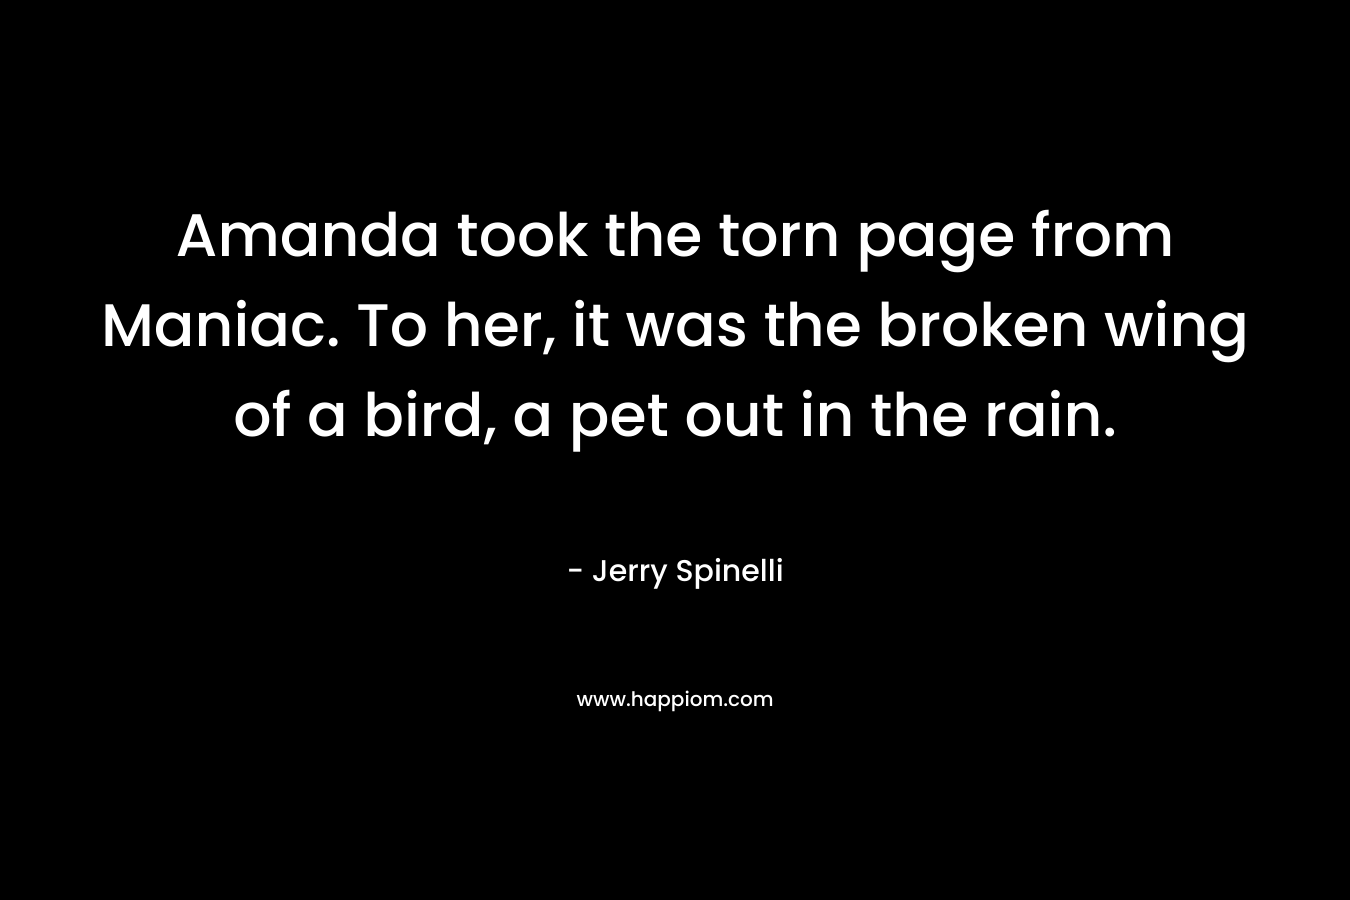 Amanda took the torn page from Maniac. To her, it was the broken wing of a bird, a pet out in the rain. – Jerry Spinelli